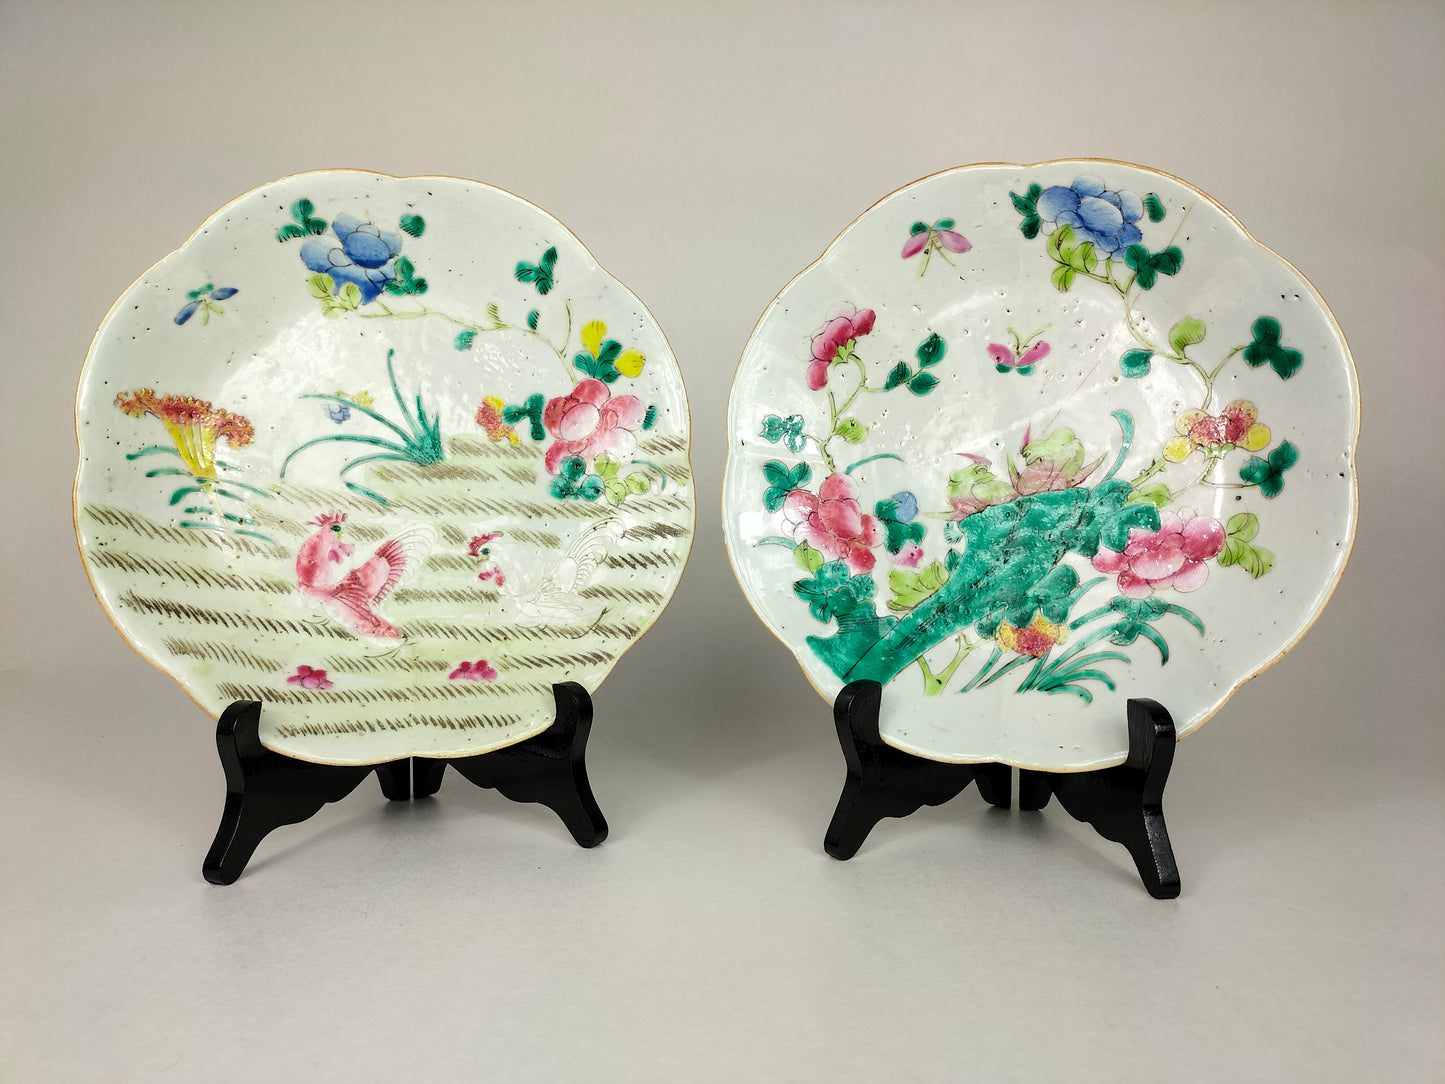 Antique 19th century famille rose plates with roosters and flowers